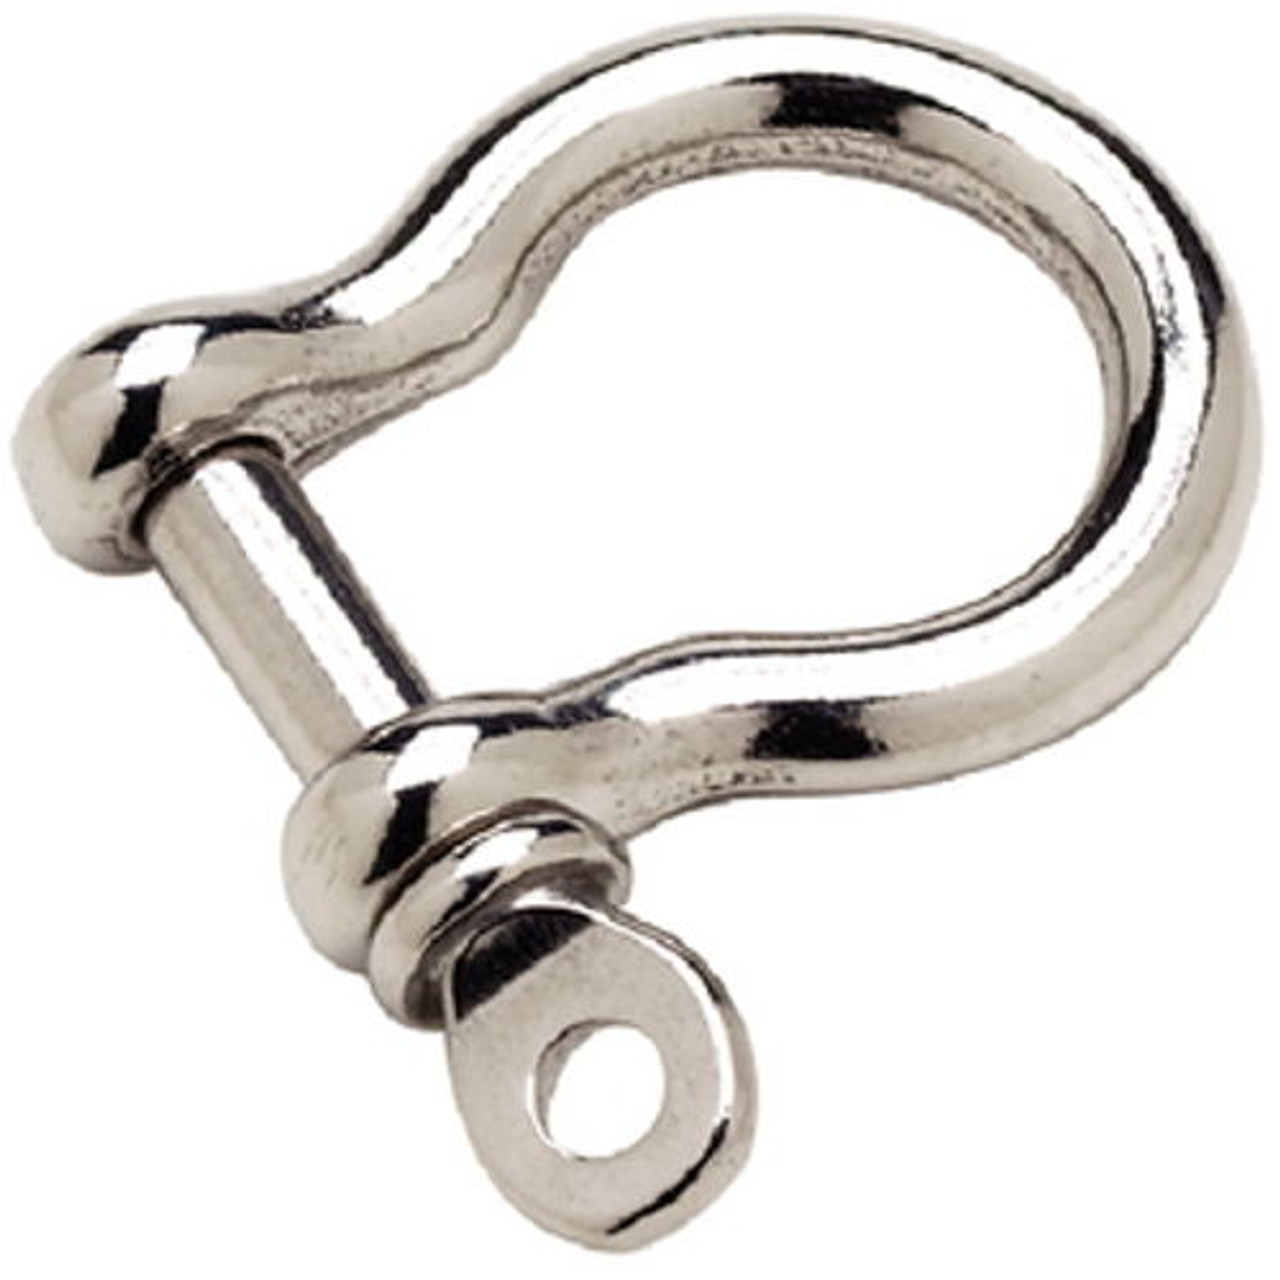 5/16 Inch Stainless Steel Anchor Shackle for Boats - 5,000 lbs Breaking Strength